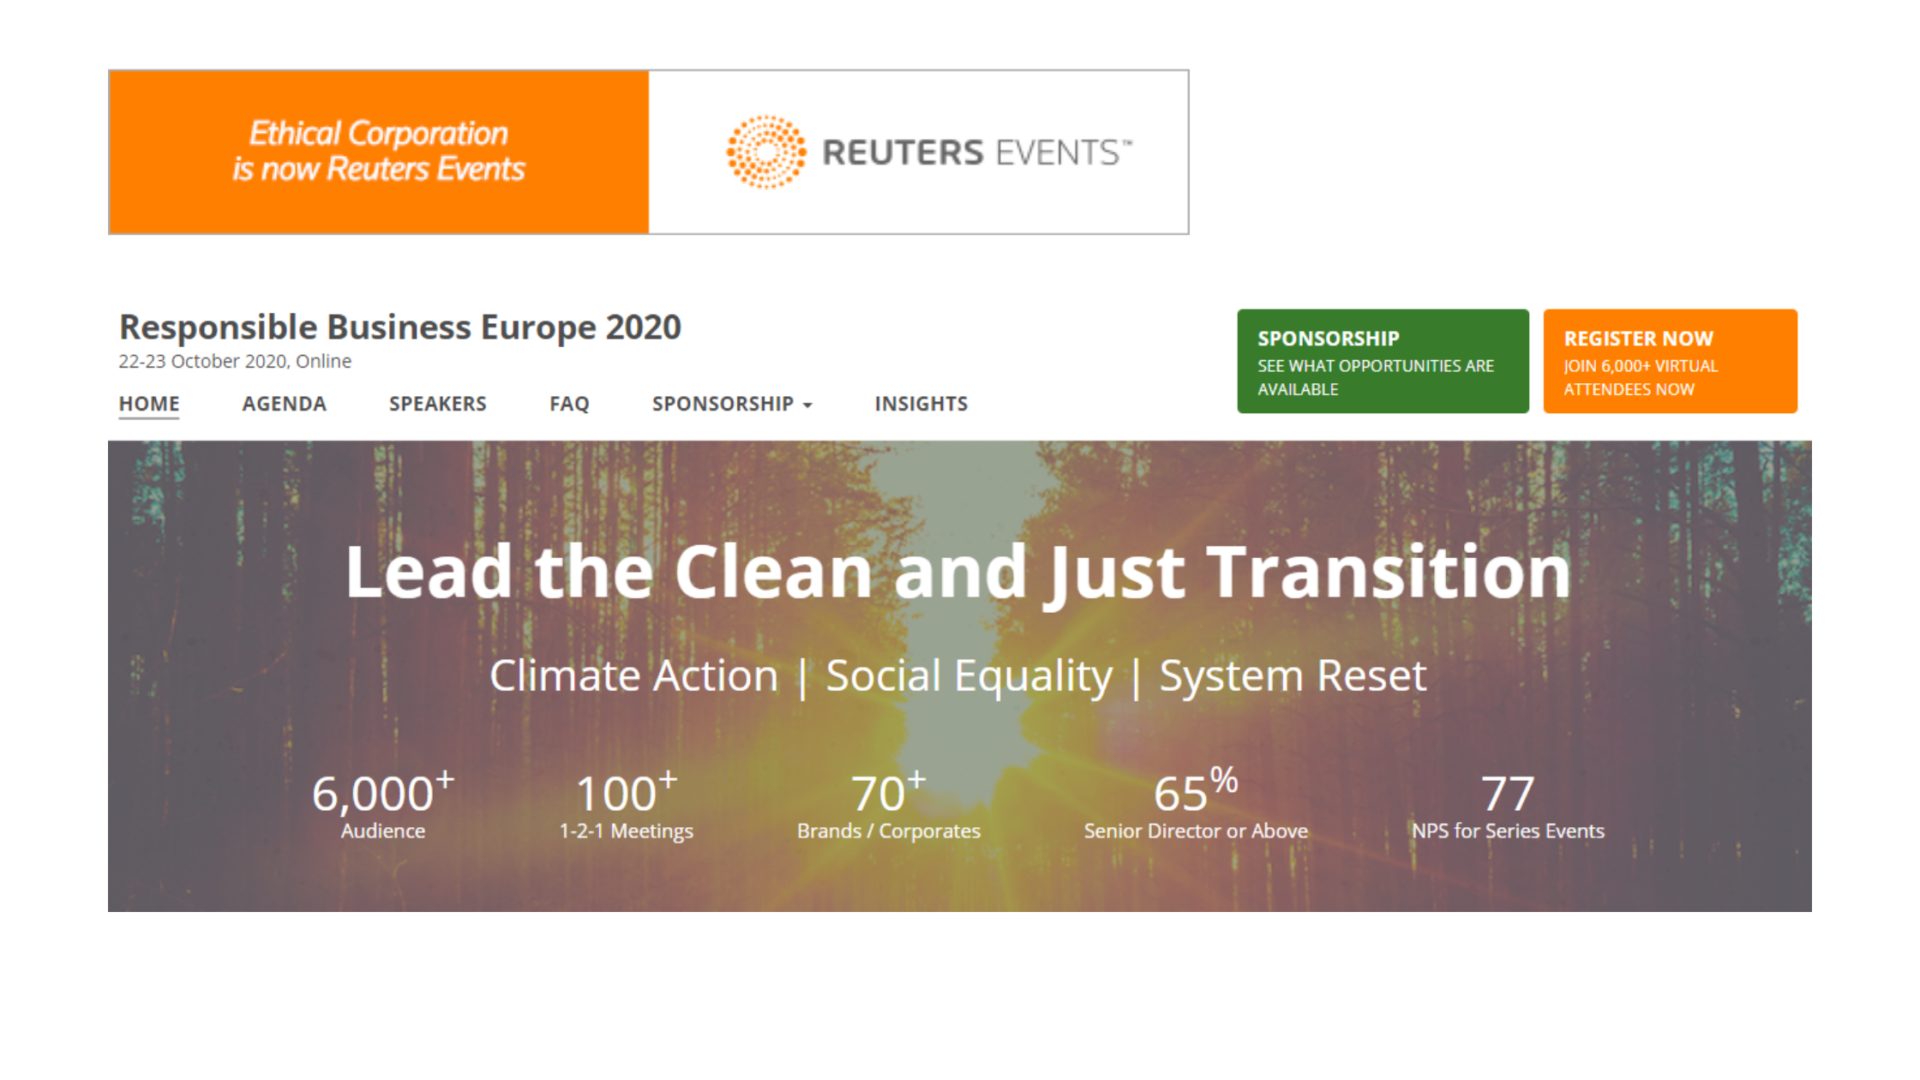 Reuters Events lanza The Responsible Business Europe 2020